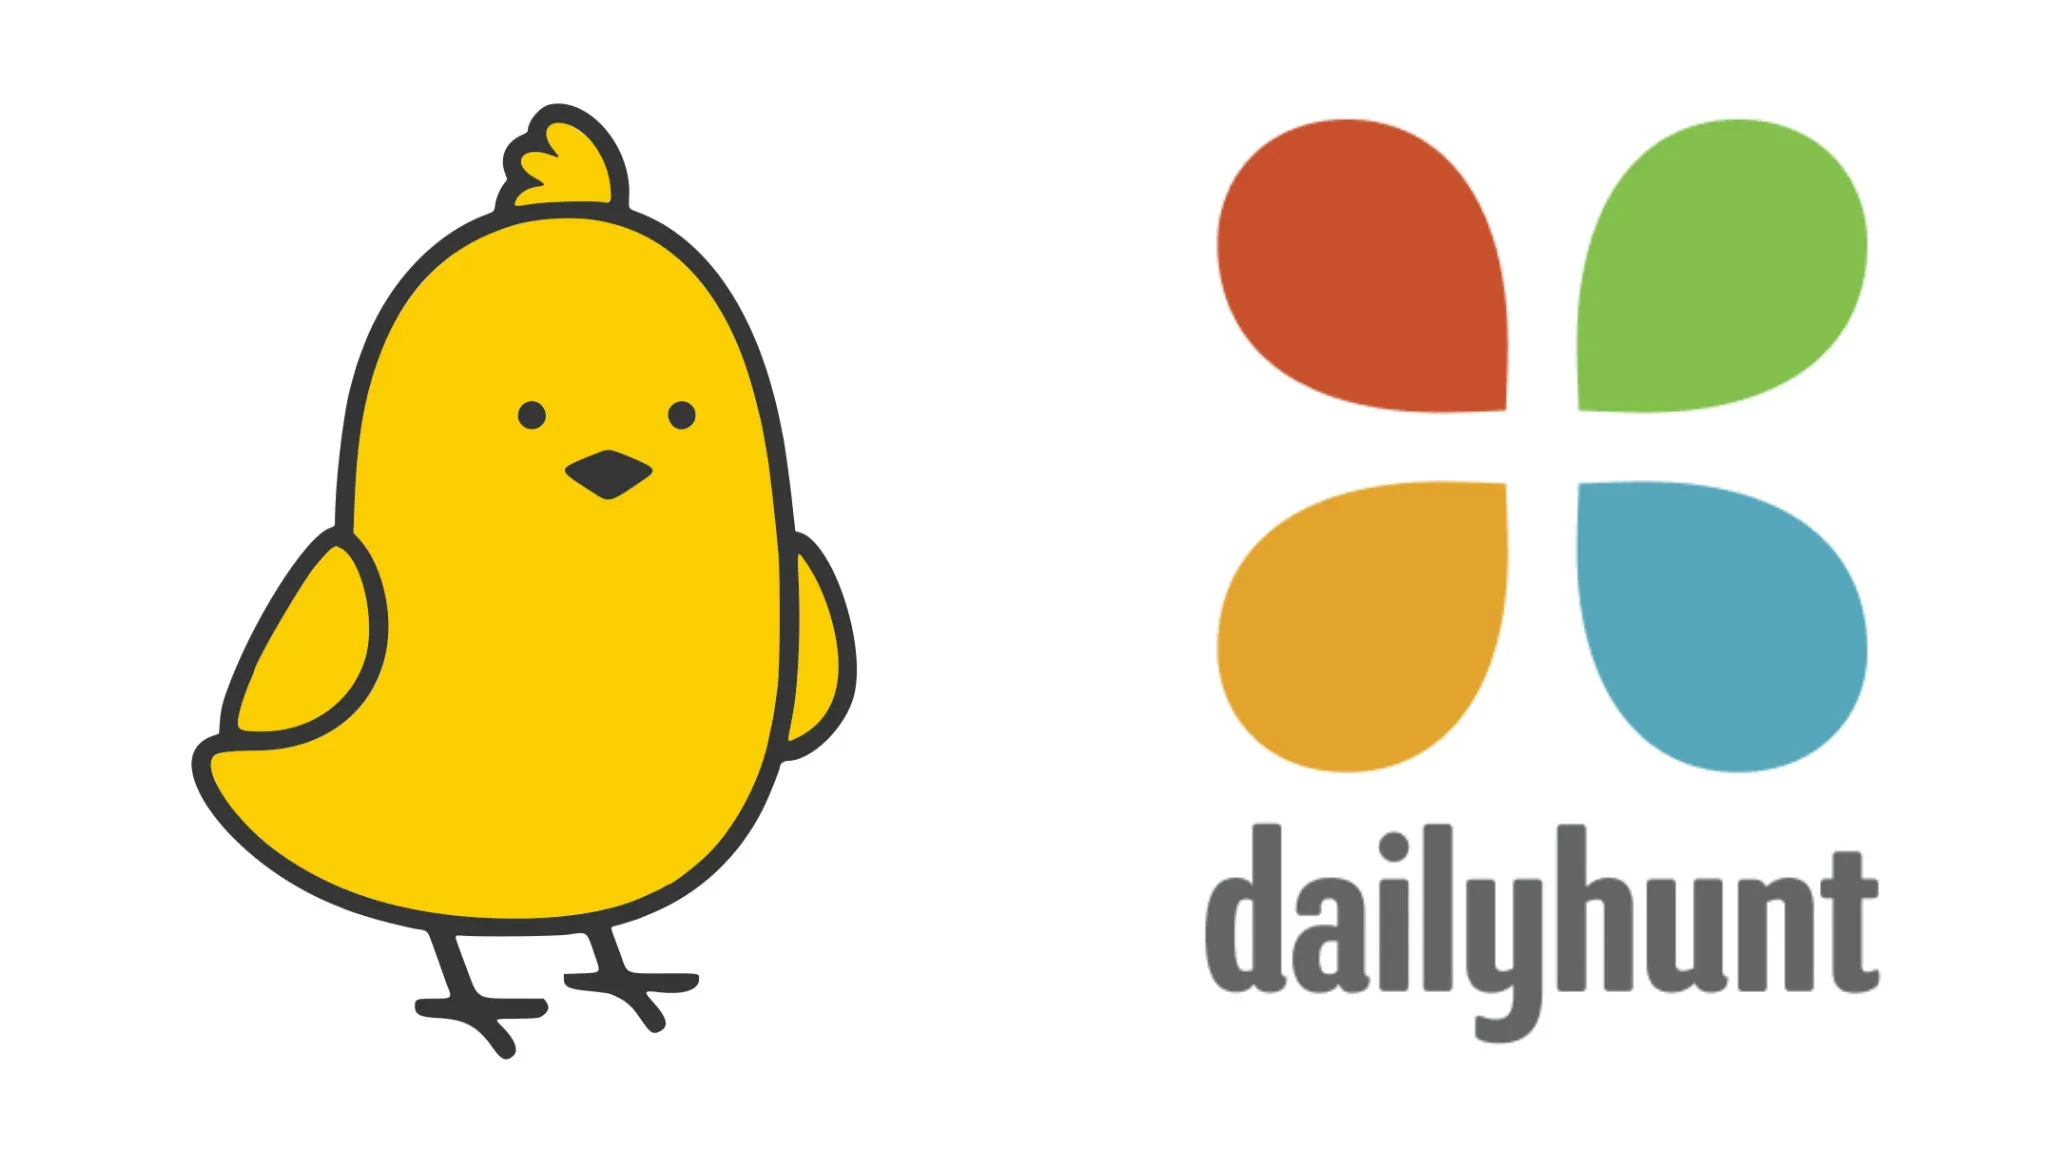 Dailyhunt In Advanced Talks To Acquire Social Network Startup Koo